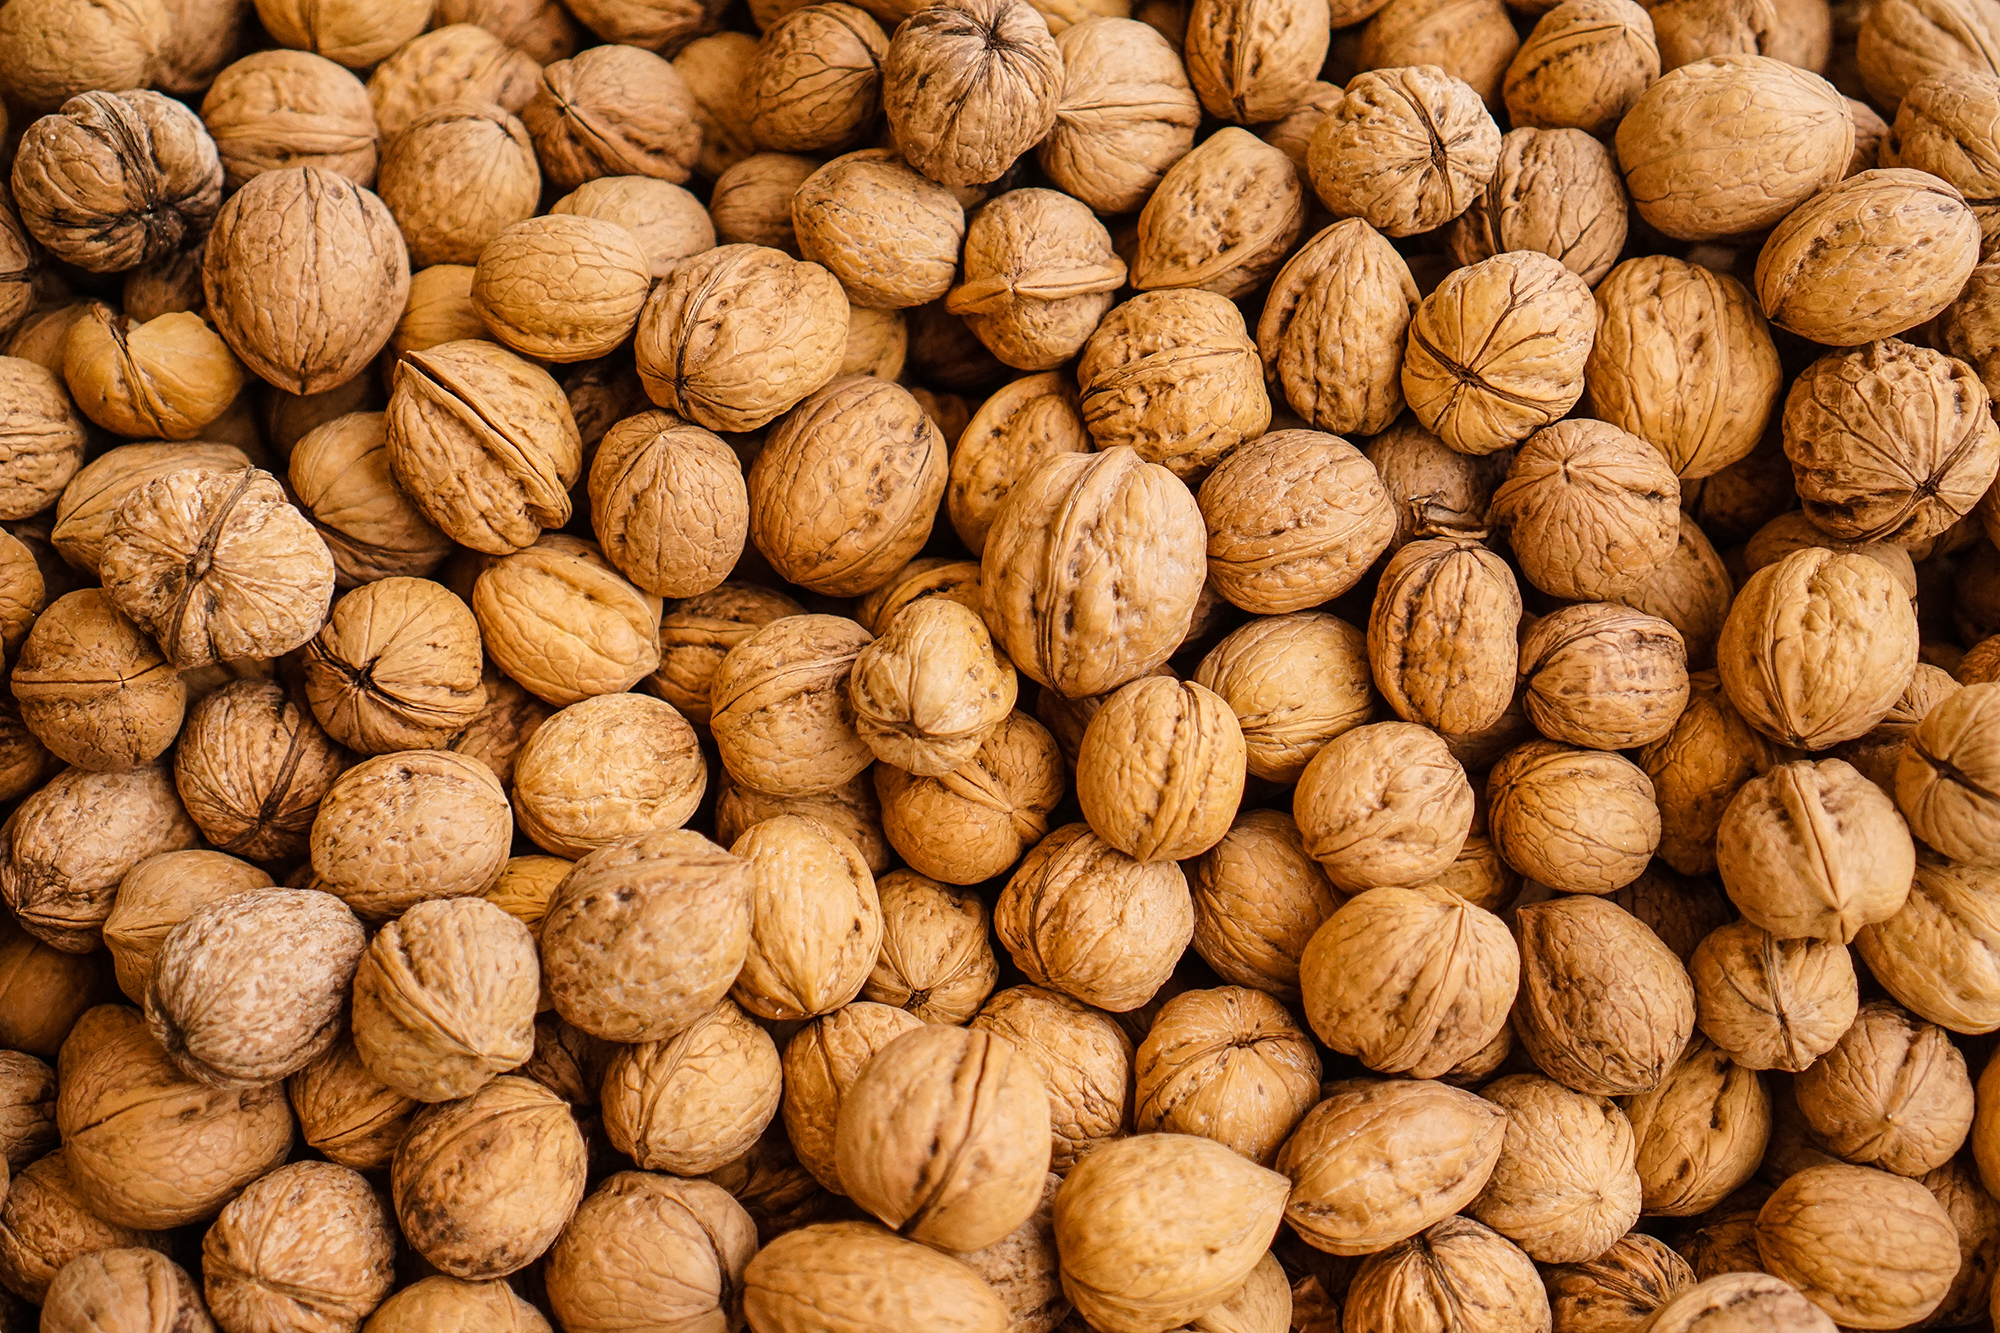 Fat from nuts can reduce inflammation in the body, which then improves fertility